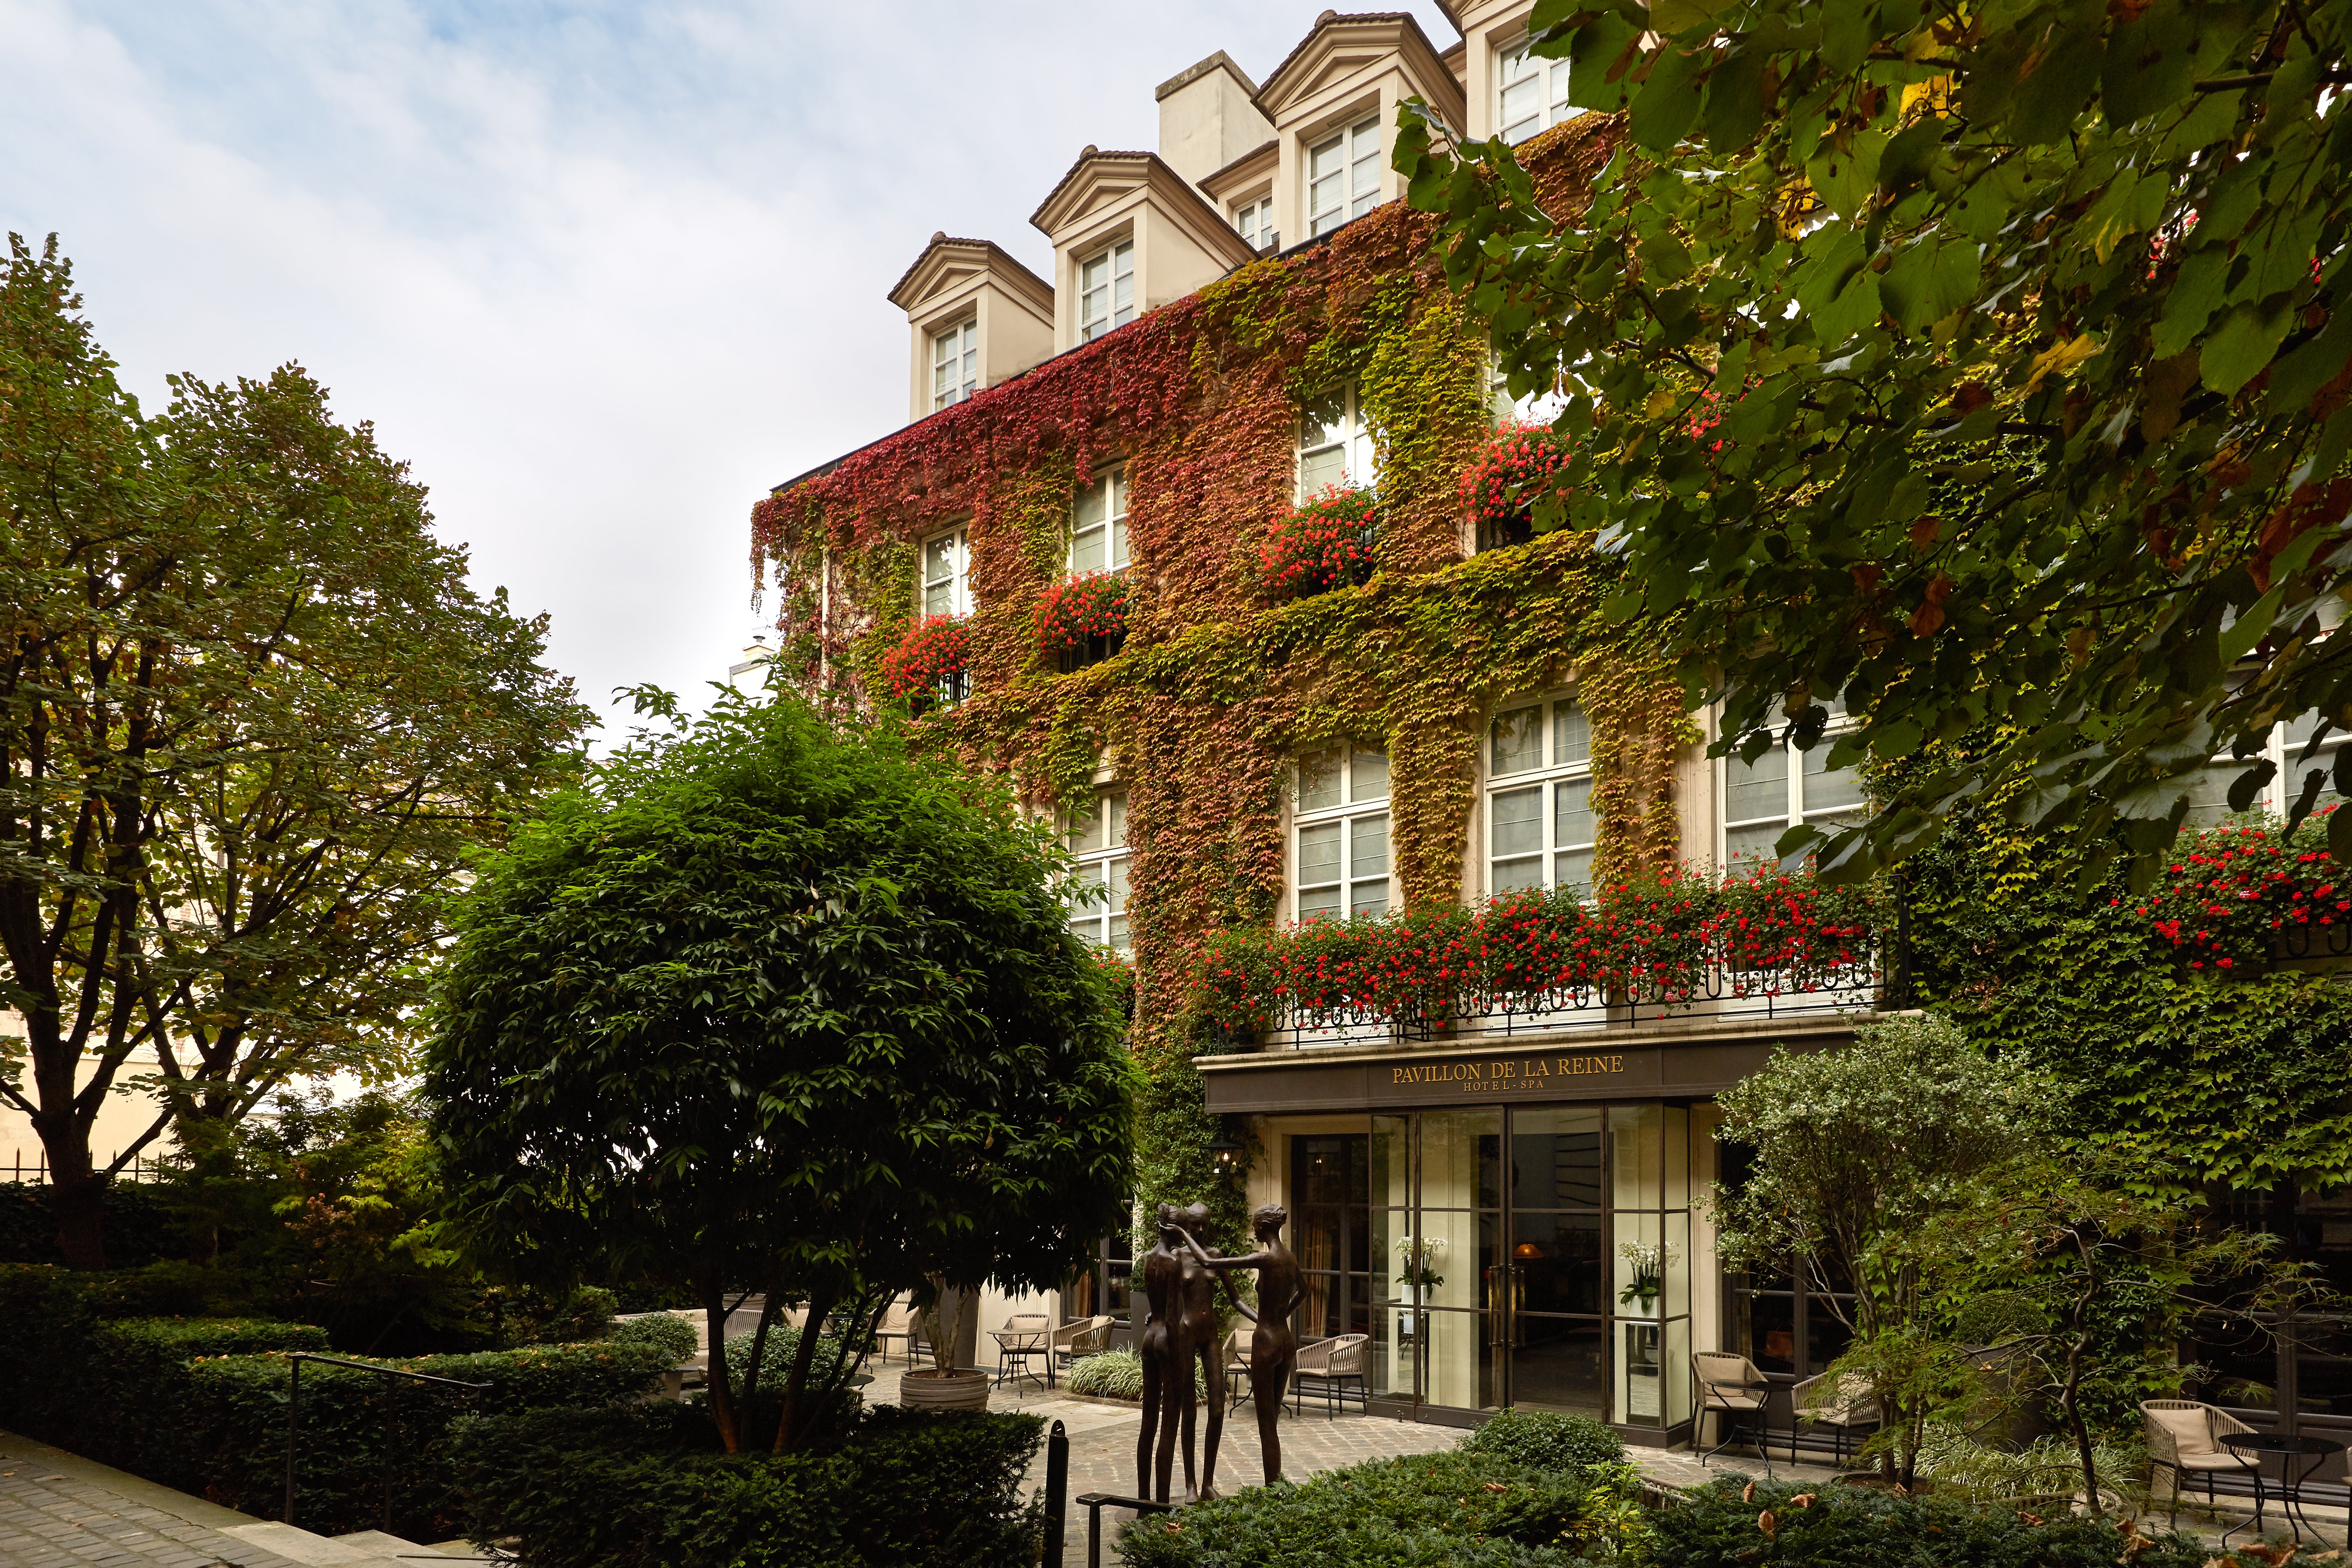 Discover a French country manor in the city